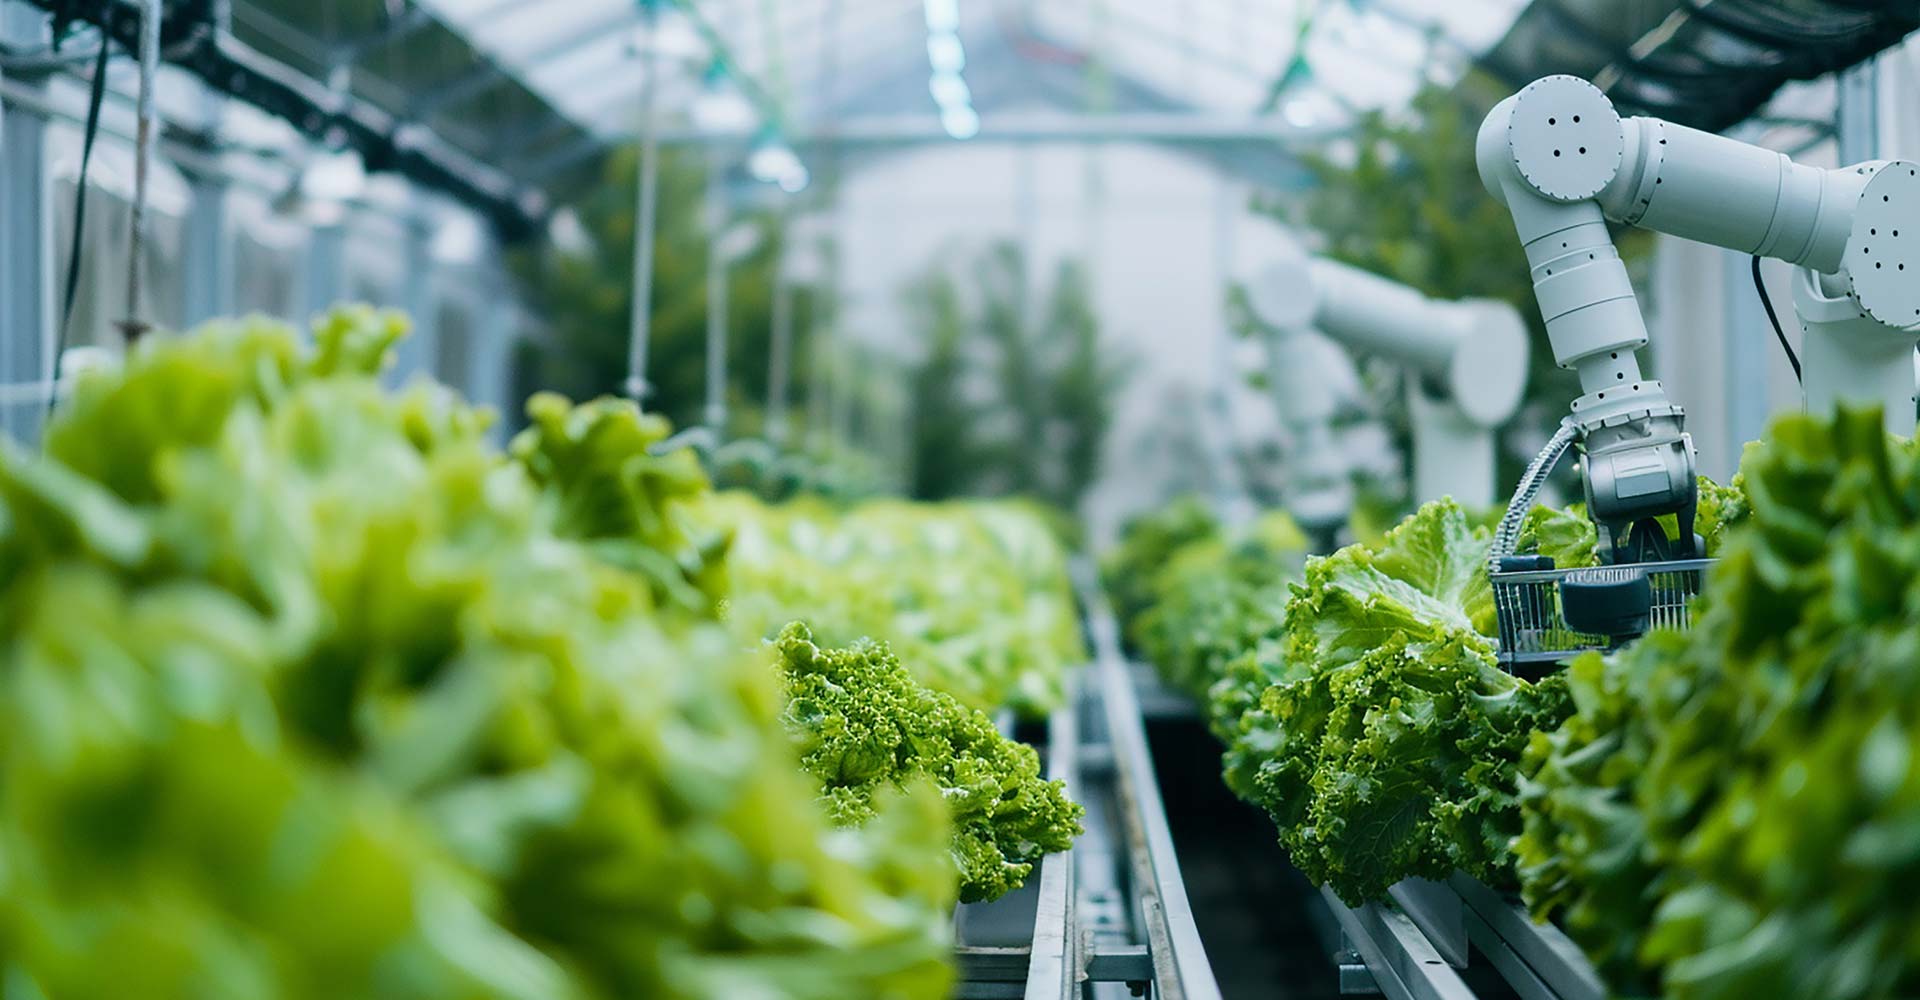 Automated robotic arms harvesting leafy greens in a modern greenhouse.